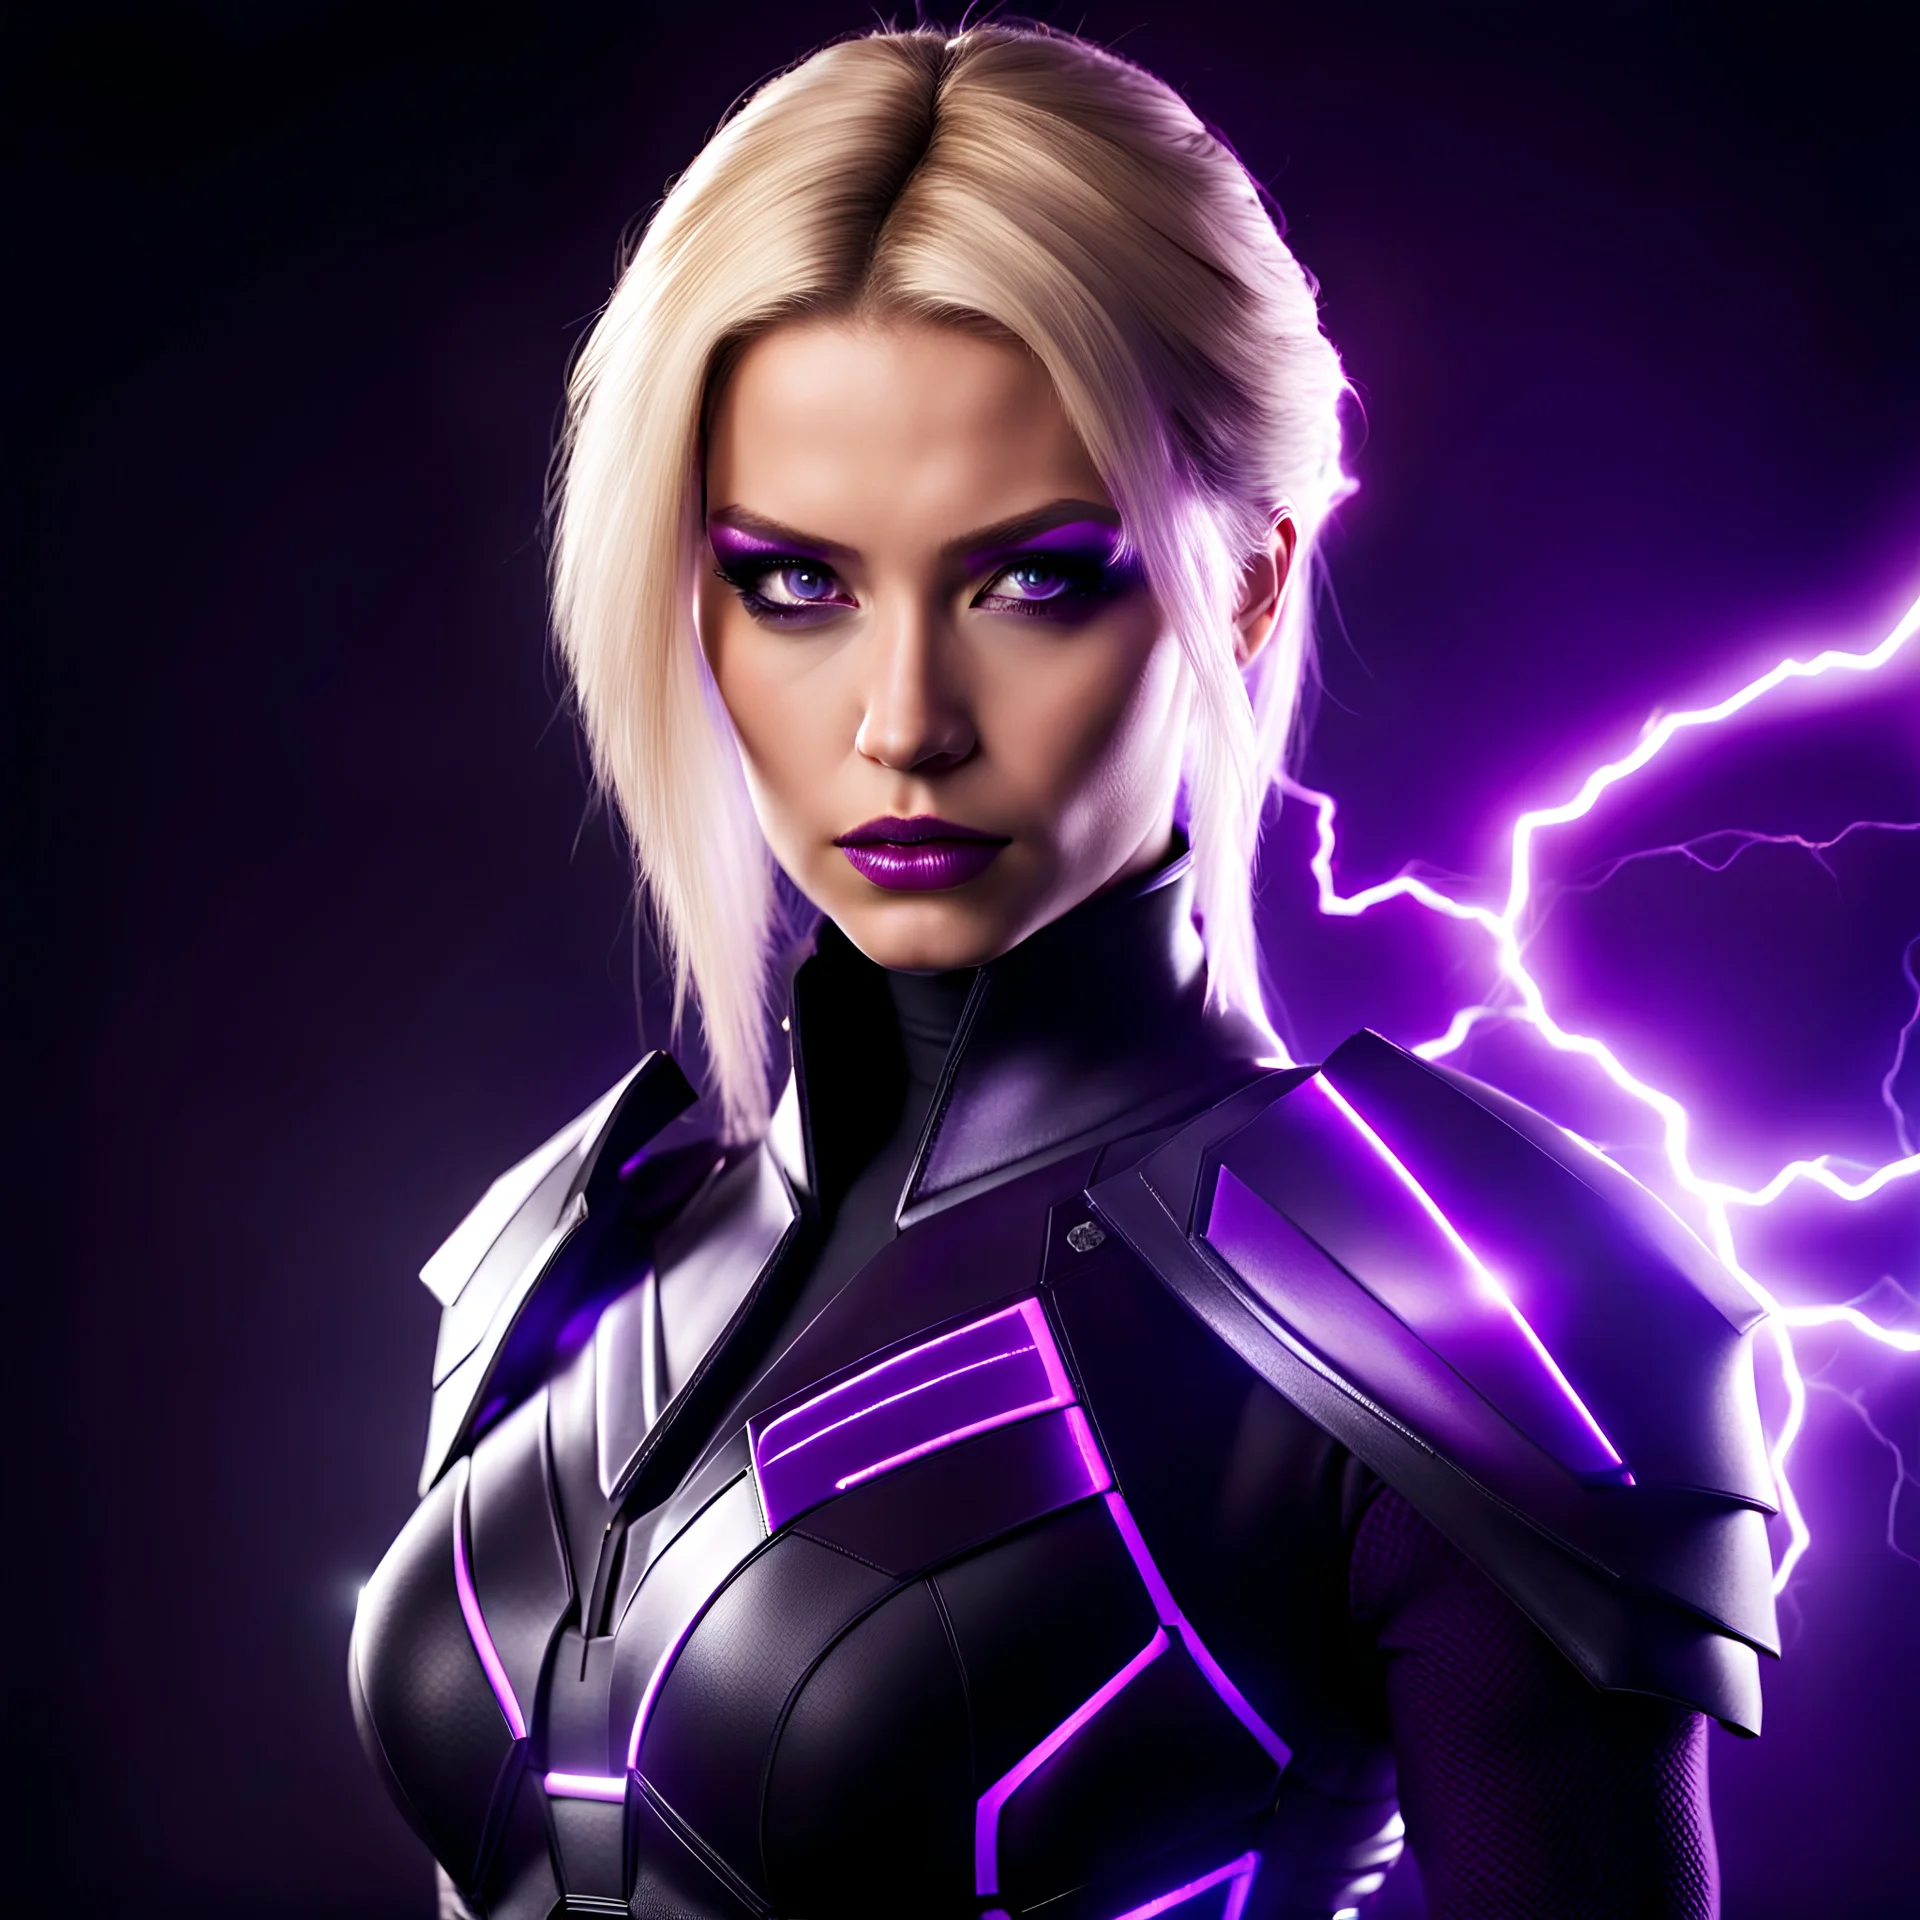 full body portrait of an attractive youthful female sith with blonde hair, black and purple clothing, dark eyeshadow, dark eyeliner, focused and intense, surrounded by crackling electricity, video game character